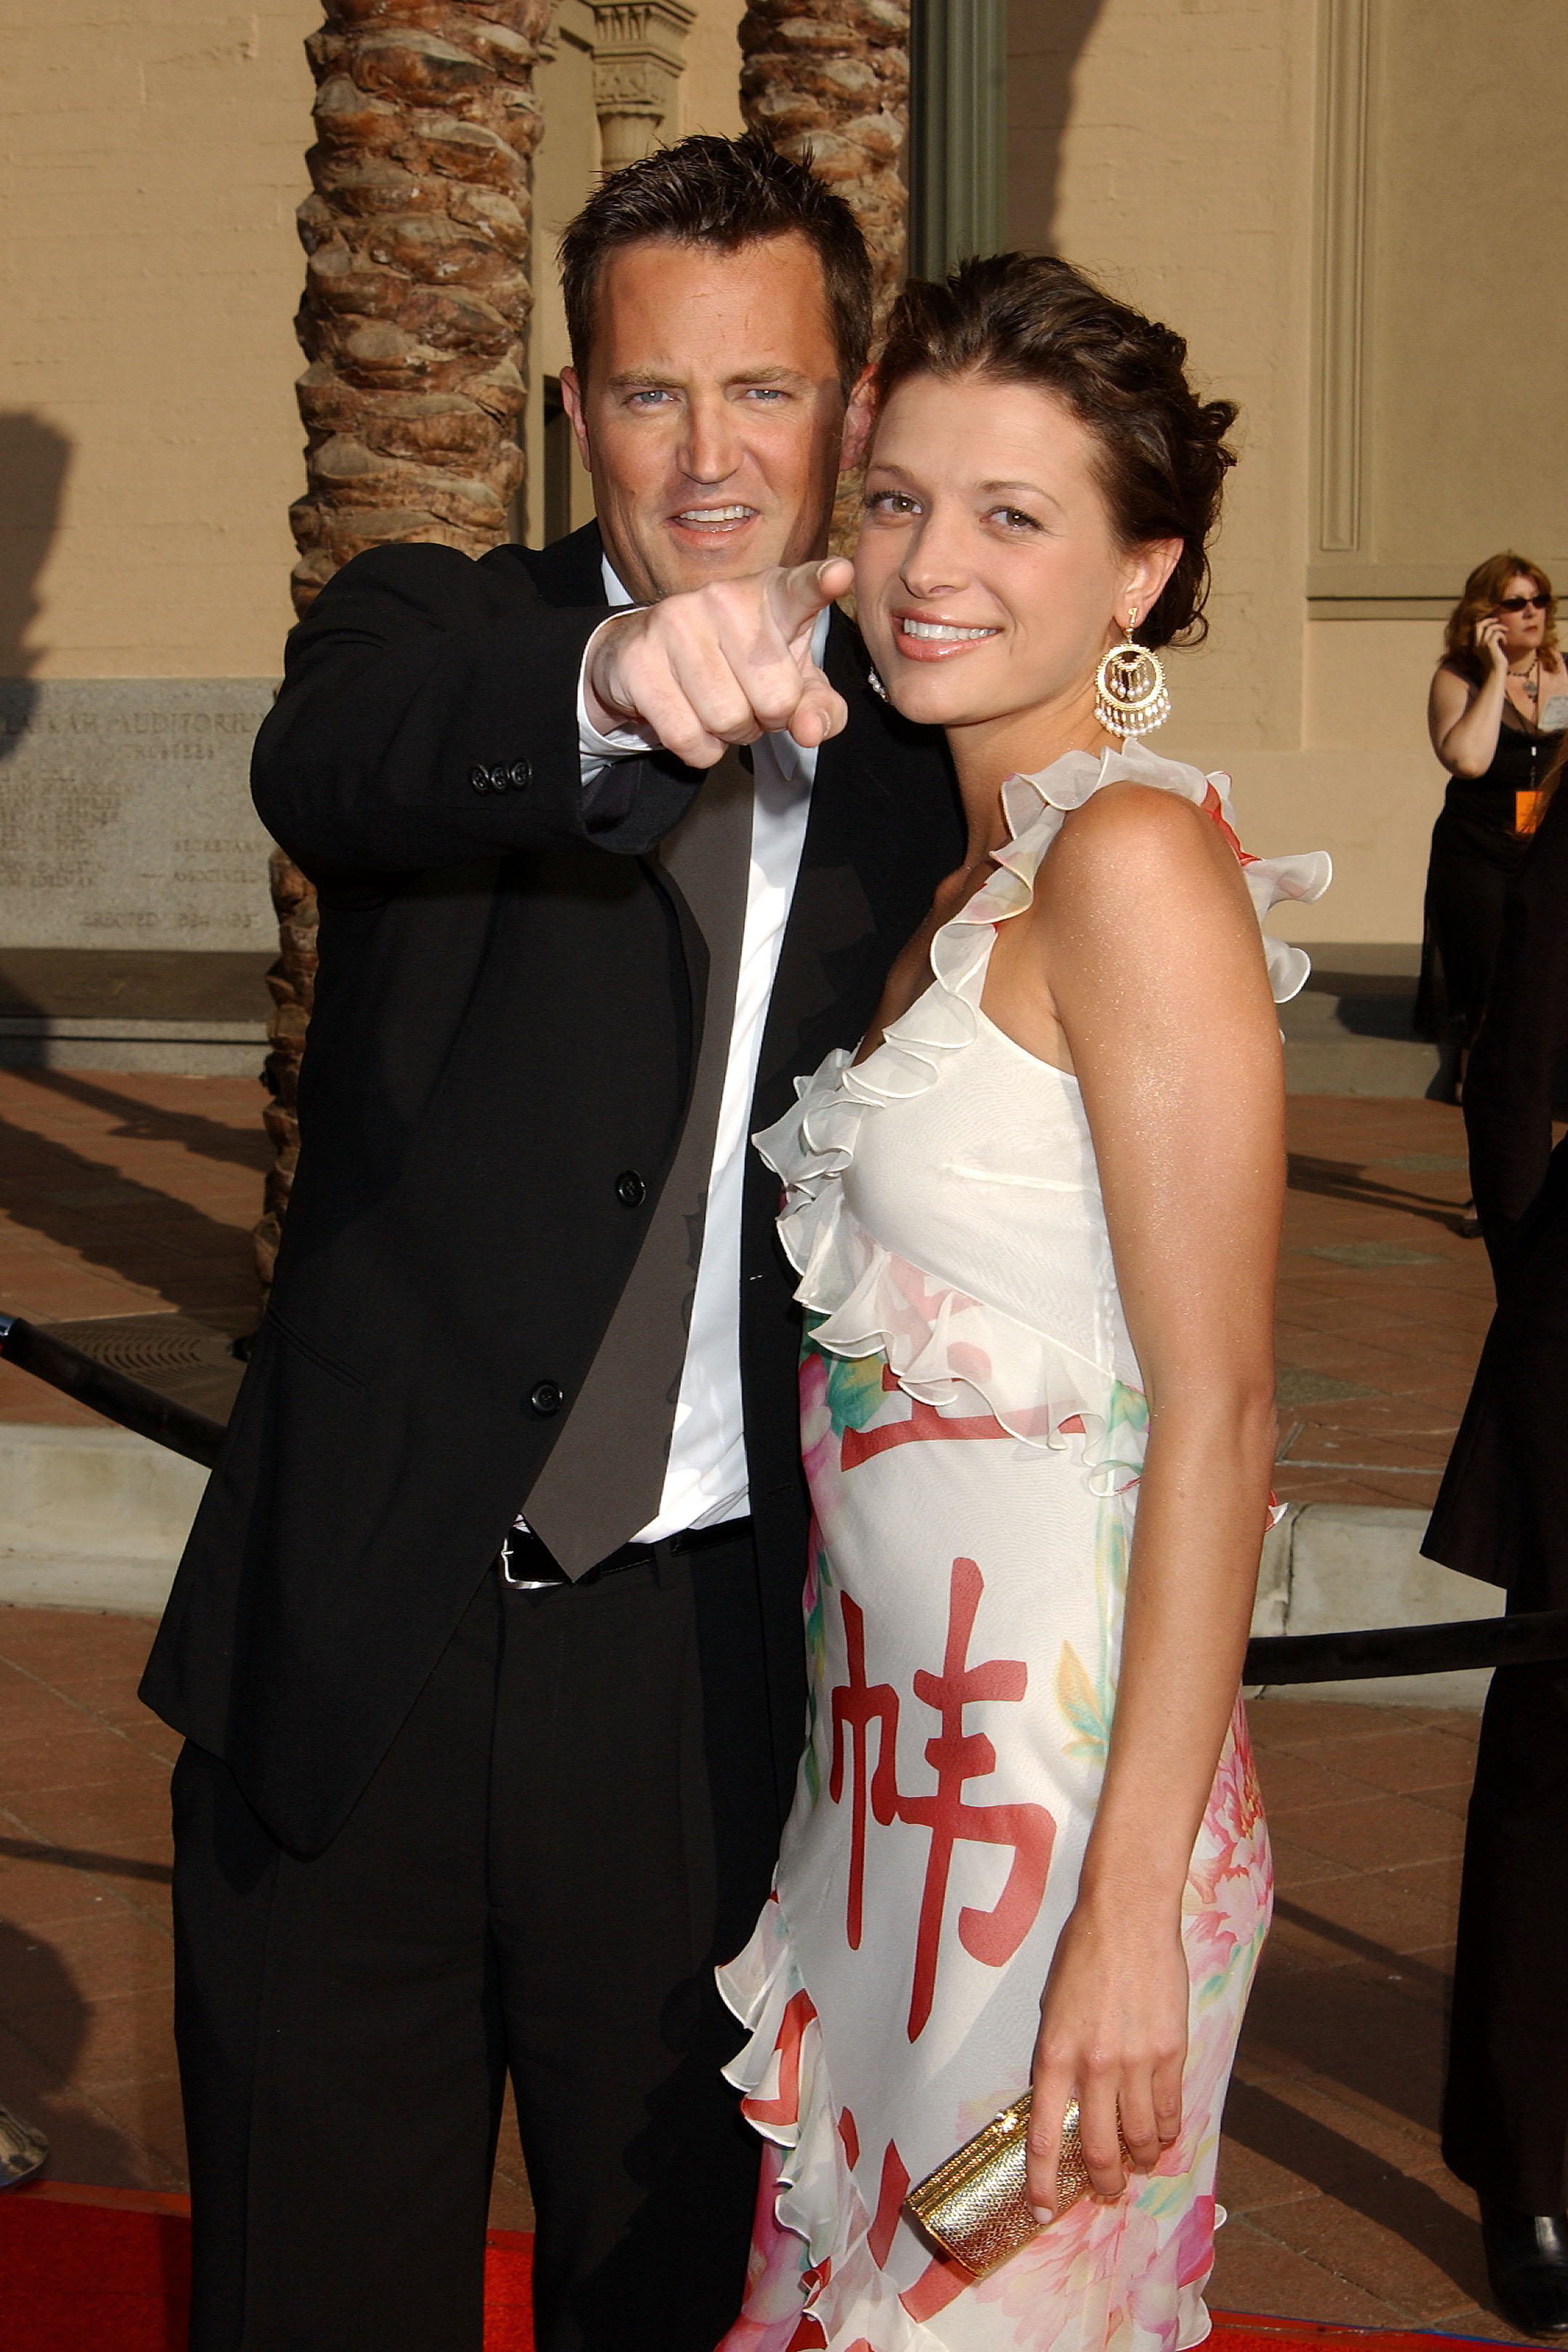 Matthew Perry and Rachel Dunn during the 2003 Emmy Creative Arts Awards on September 13, 2003 in Los Angeles, California | Source: Getty Images